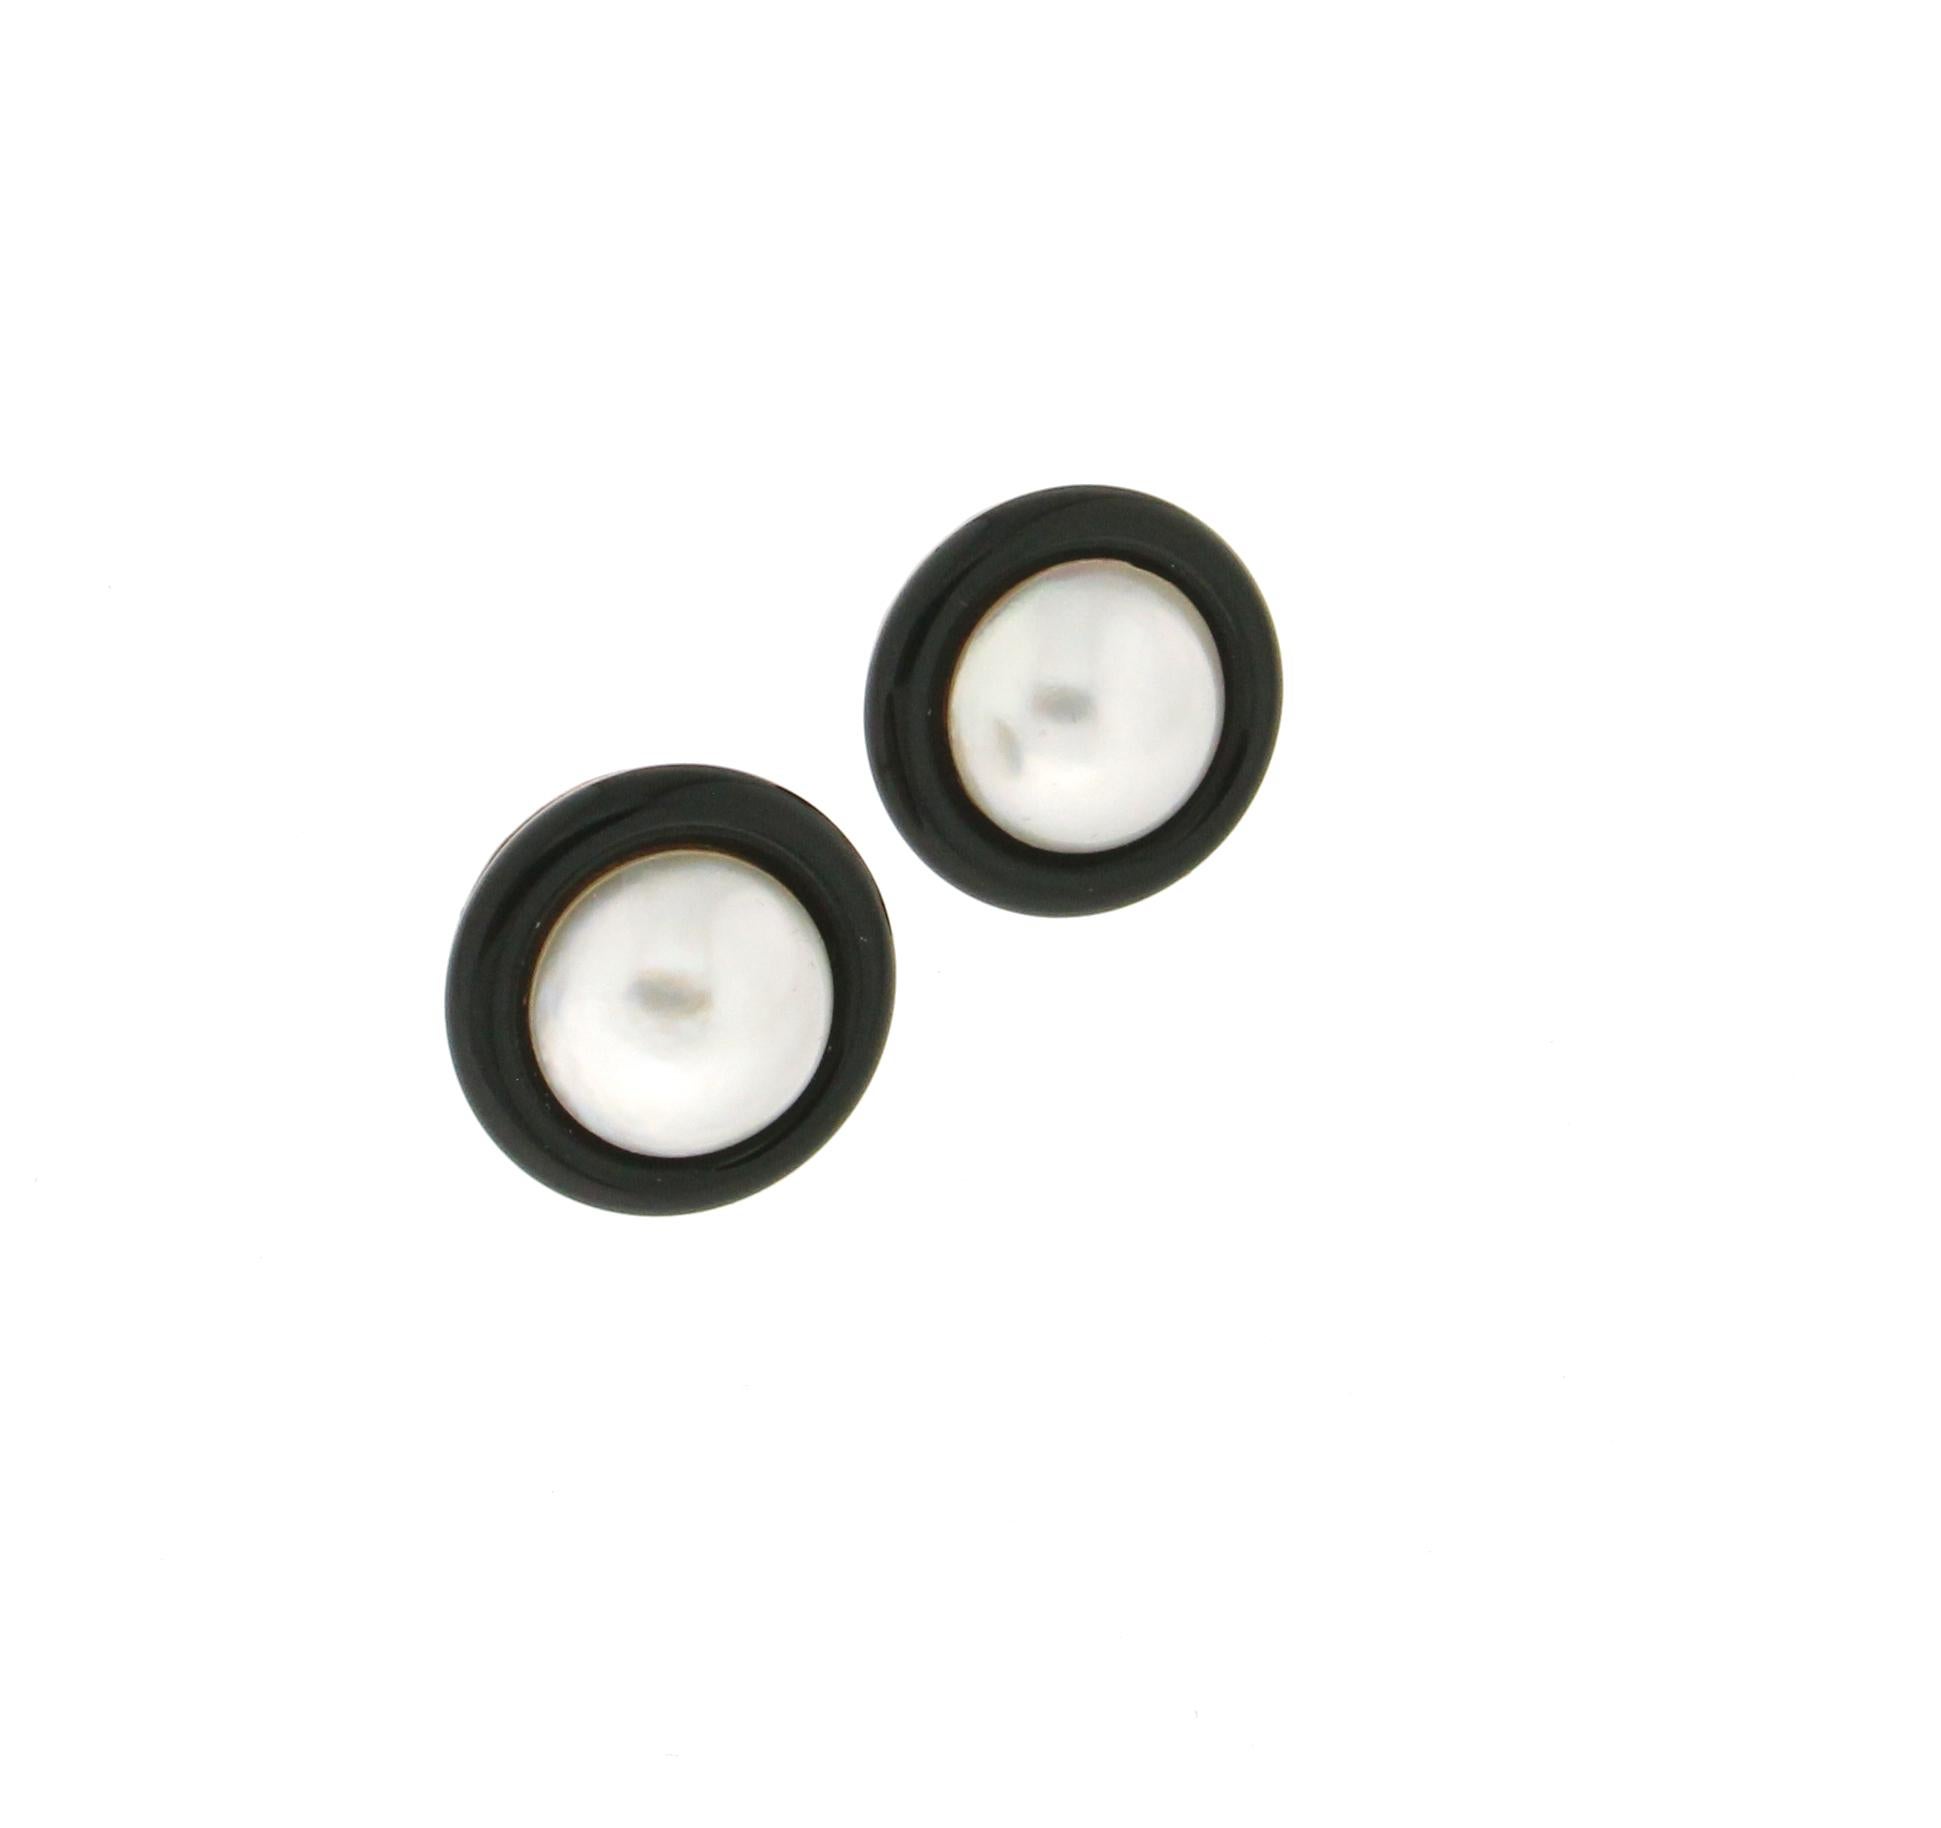 9 karat yellow gold stud earrings. Handmade by our artisans assembled with mother-of-pearls and round onyx

Earrings total weight 7.30 grams